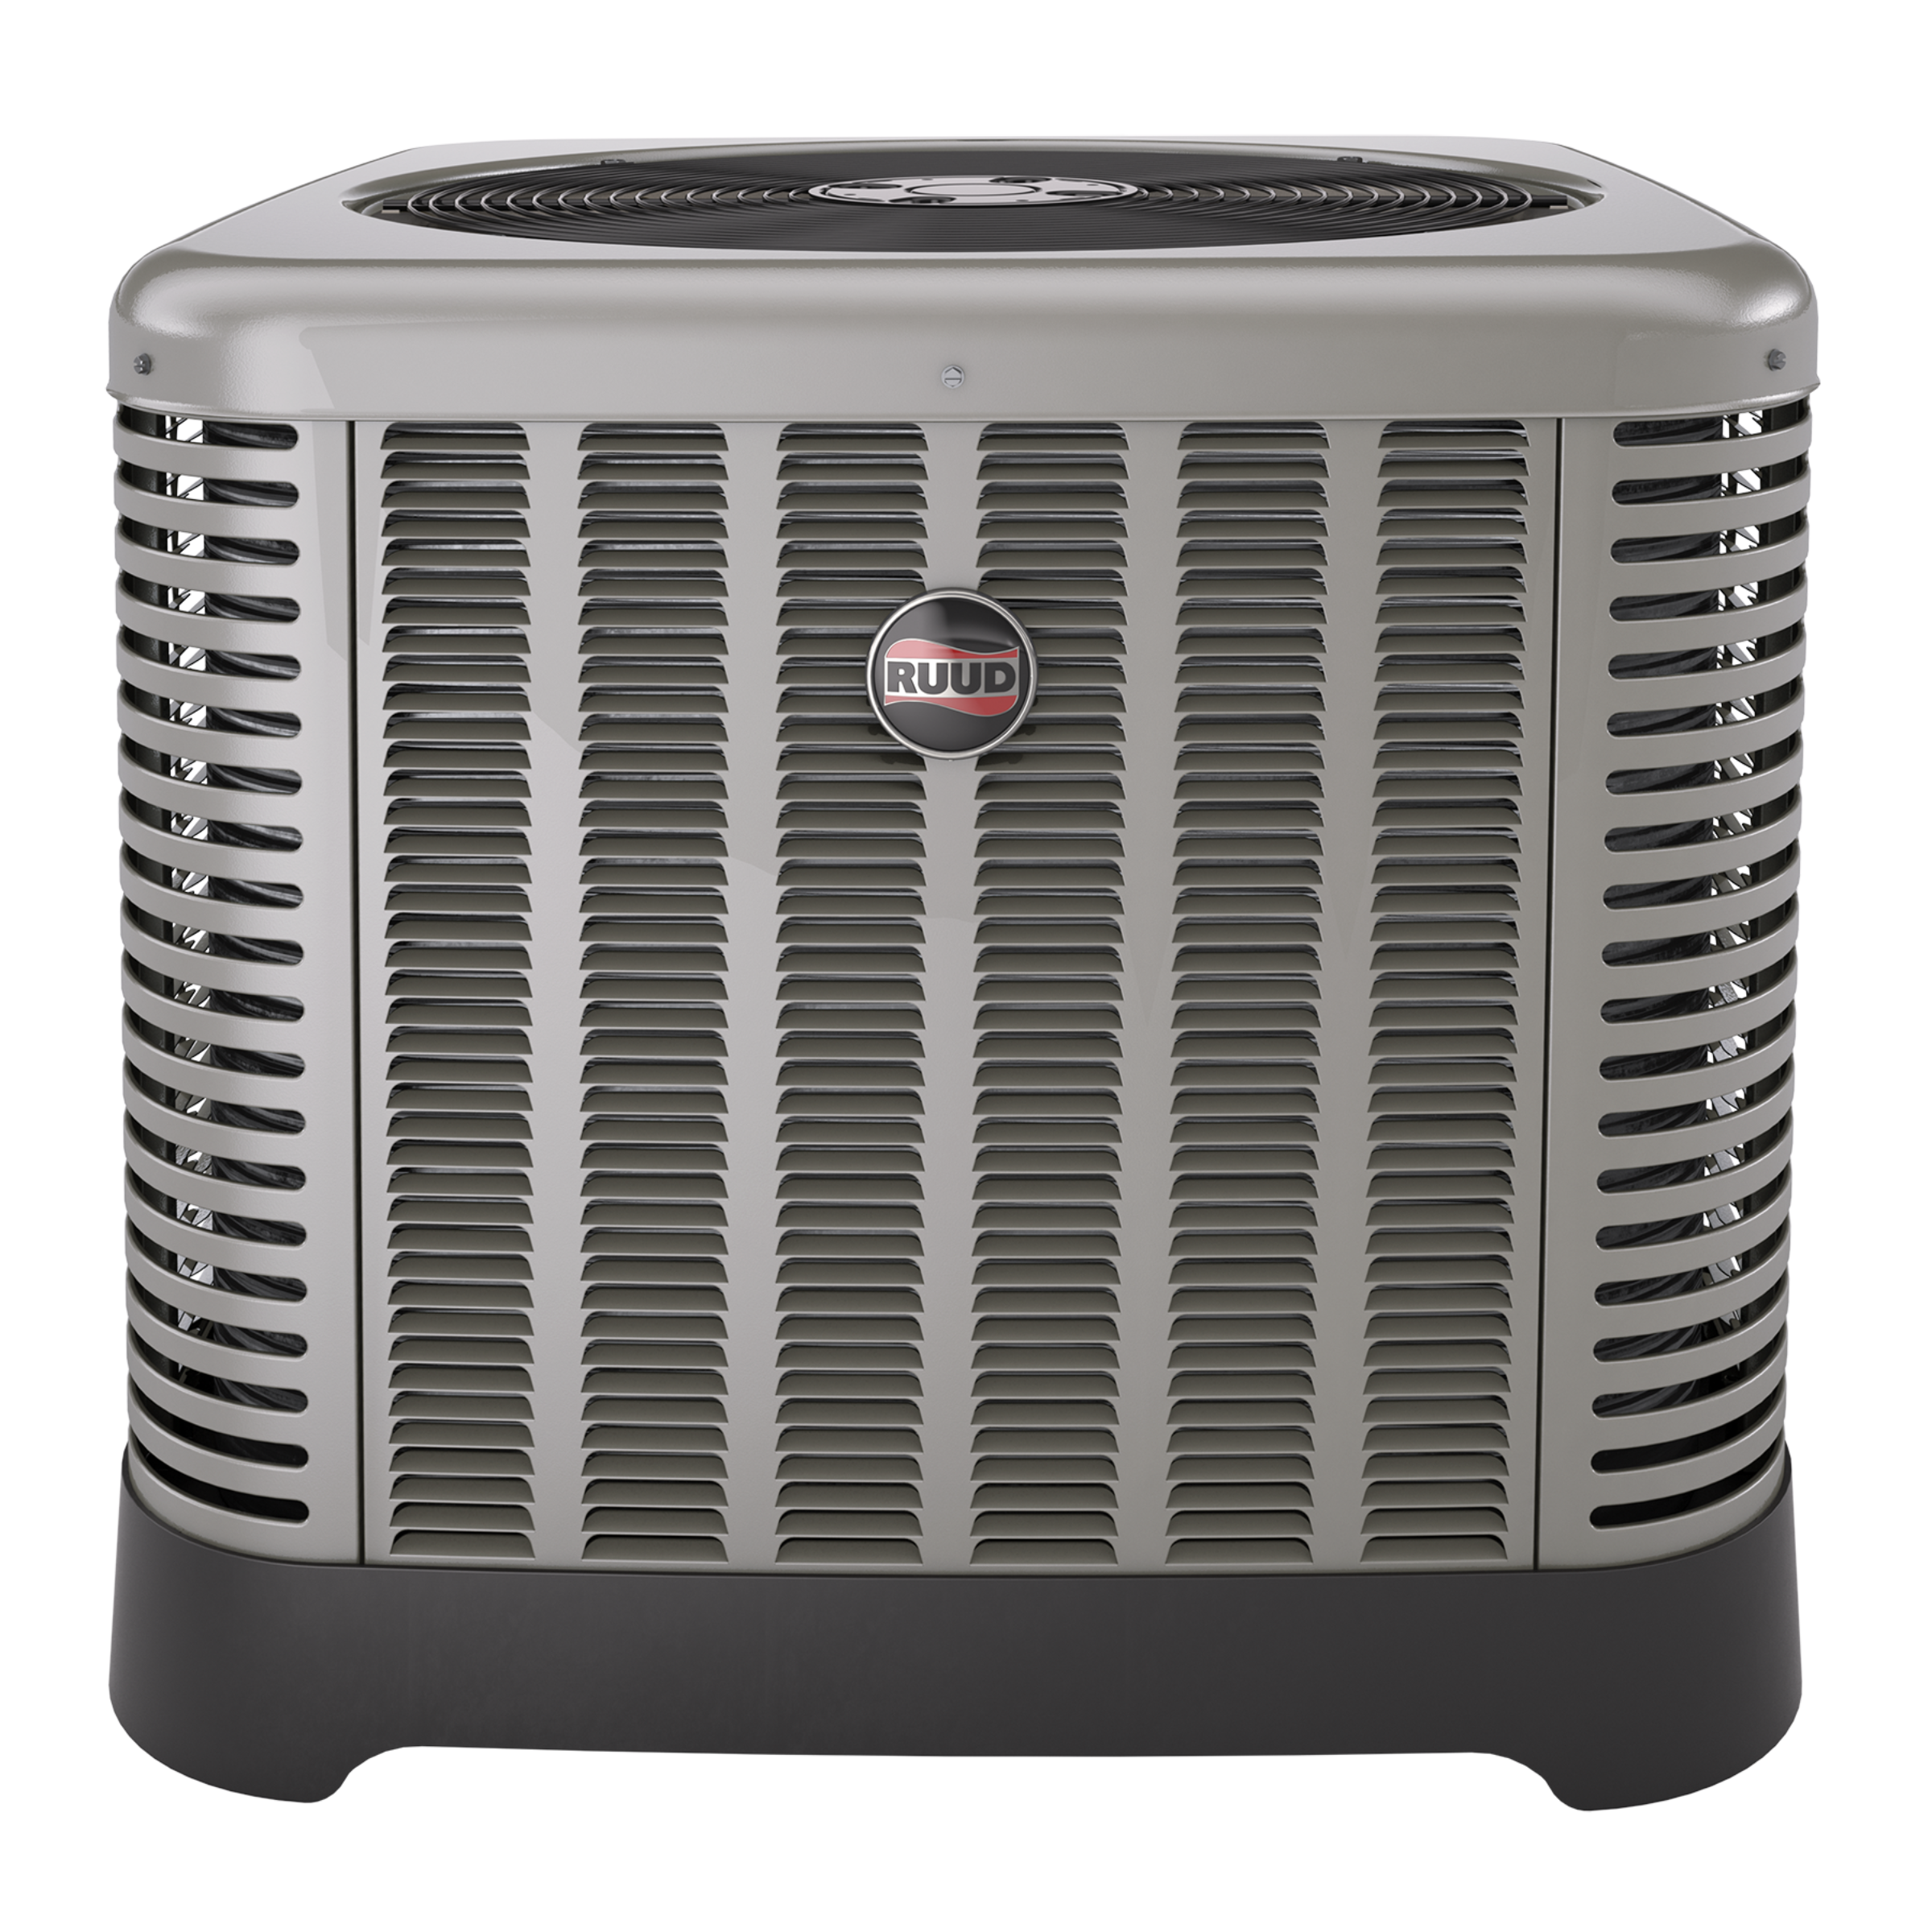 RA14 Ruud Achiever ® Series Single Stage Air Conditioning Condensing Unit 14 SEER/11.5 EER, 1.5 to 5 Tons, Cooling Capacities 17.3 to 60.5 kBTU, 208-230V/1Ph/60Hz